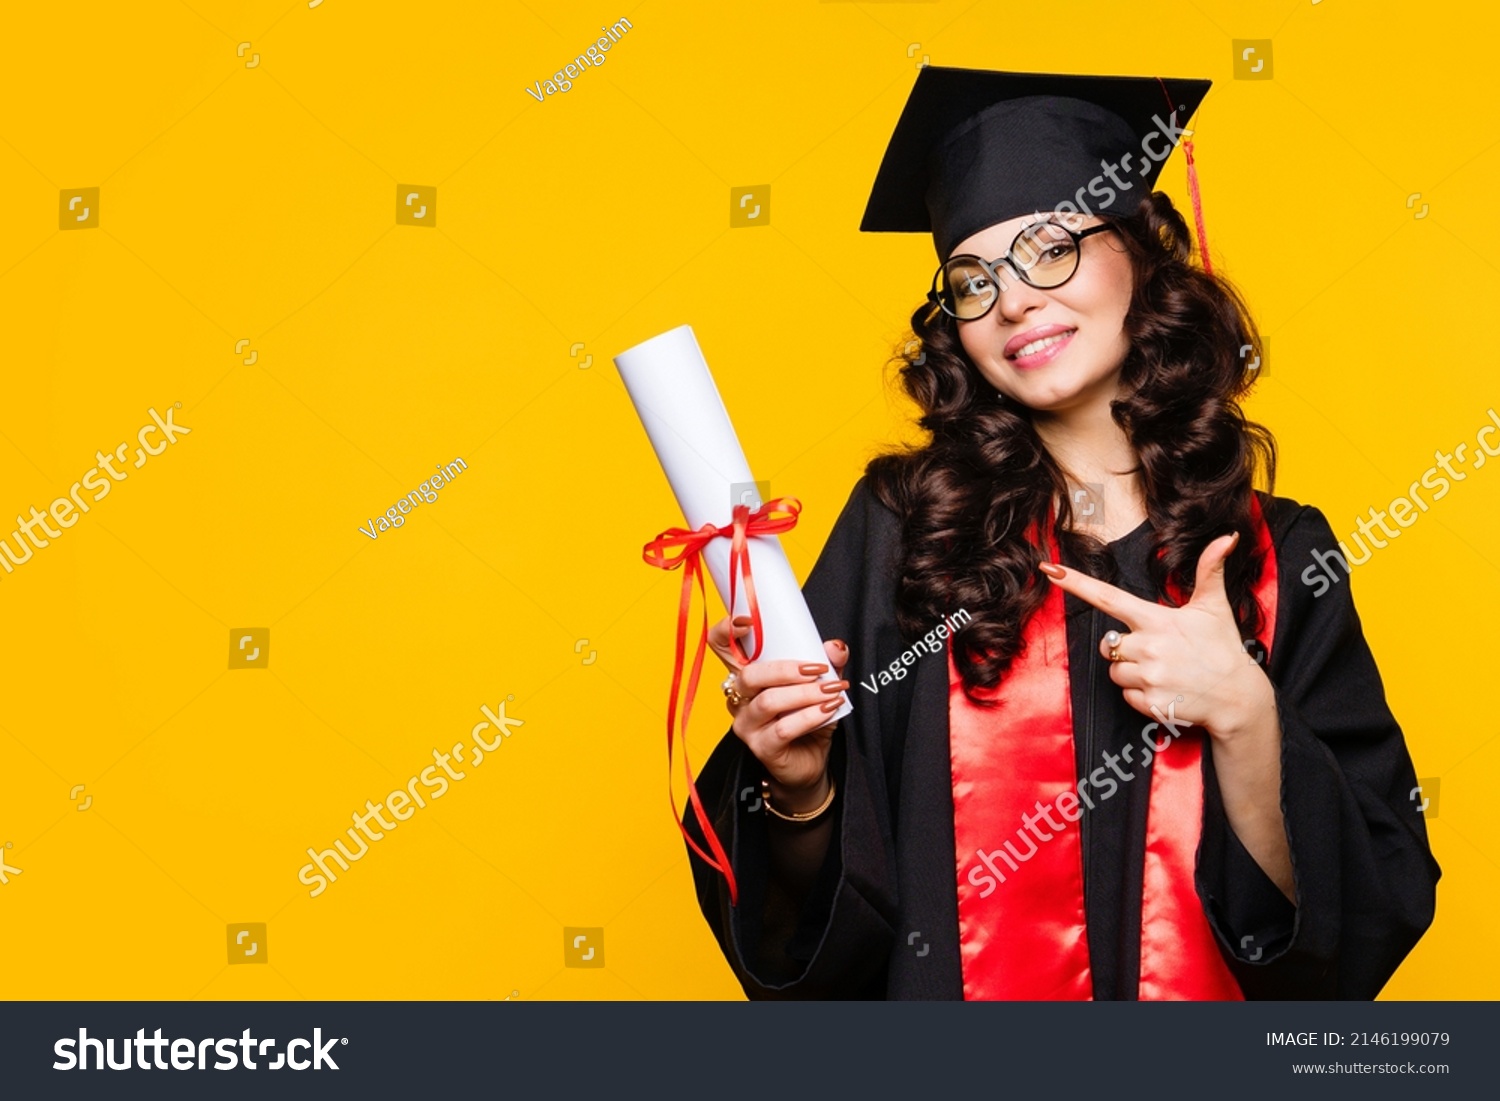 Girl graduate in graduation hat and eyewear with diploma on yellow backdrop. Brunette young woman wearing graduation cap and ceremony robe holding Certificate tied with red ribbon. Education Concept  #2146199079